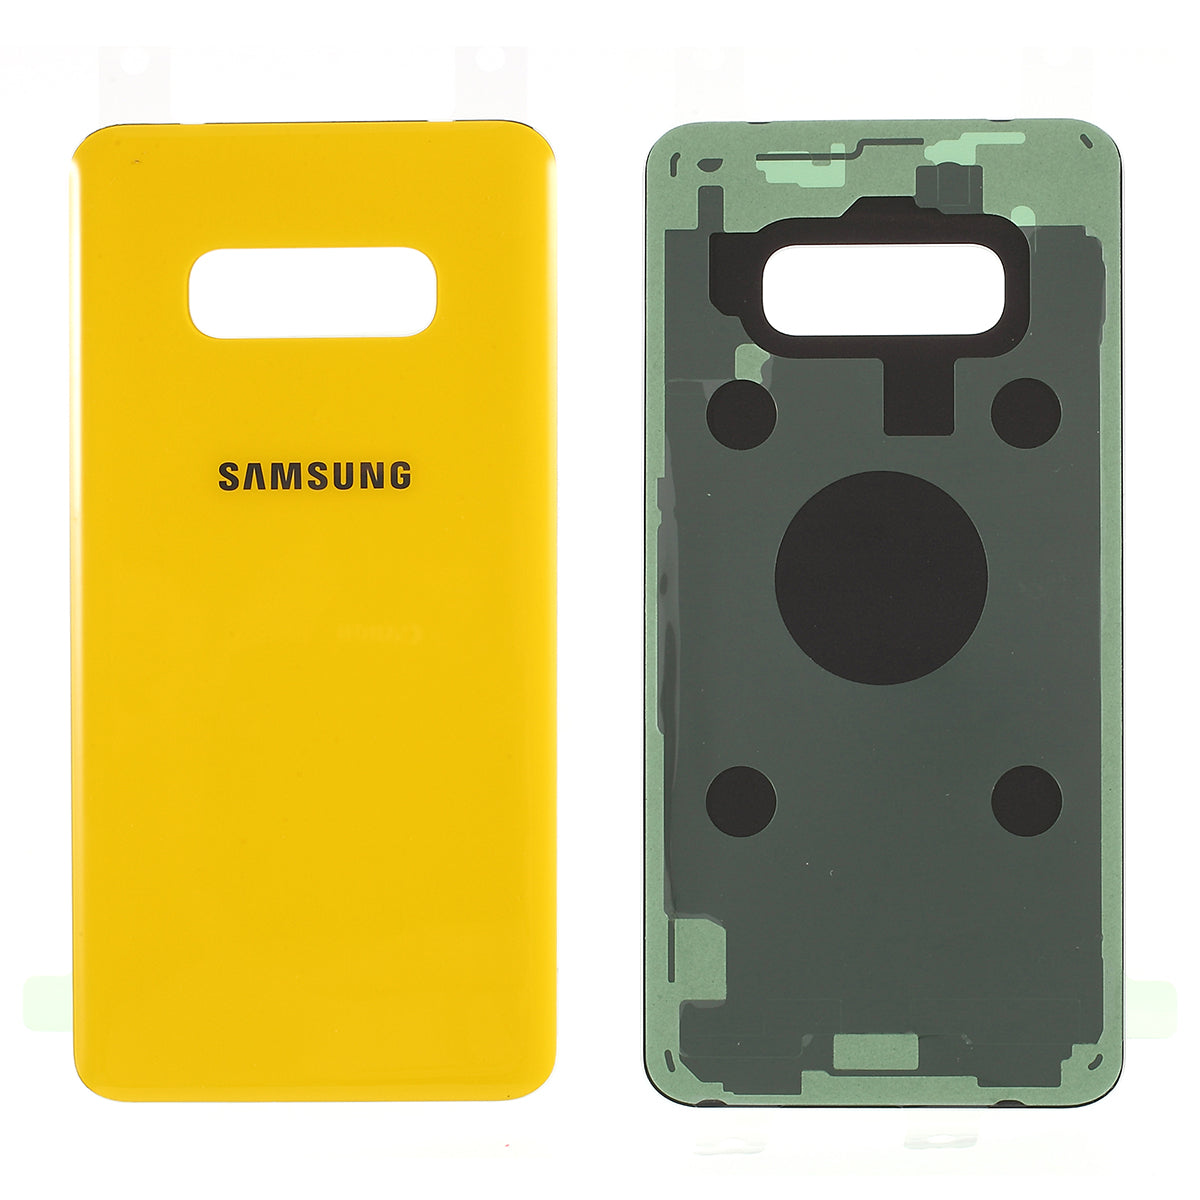 Battery Door Cover Housing with Adhesive Sticker for Samsung Galaxy S10e G970 - Yellow